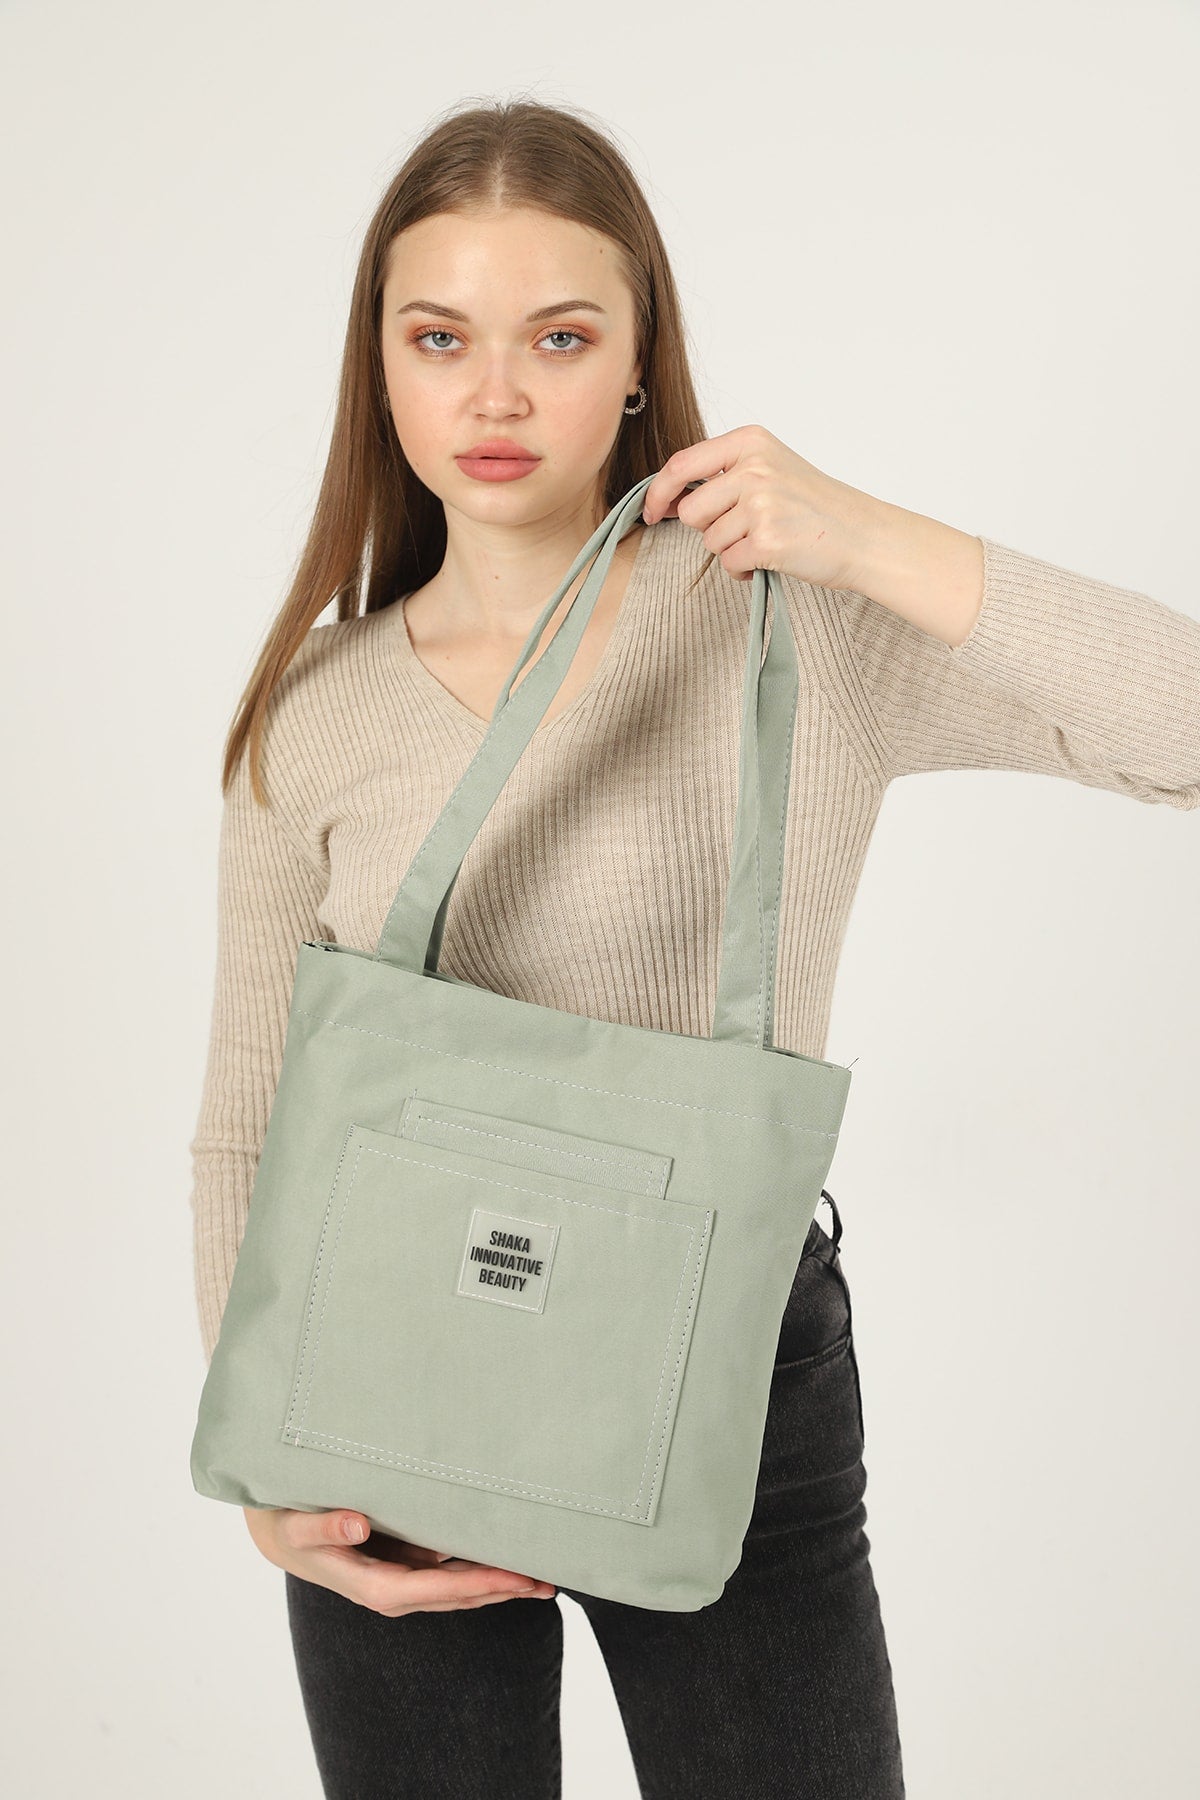 Green U22 3-Compartment Front 2 Pocket Detailed Canvas Fabric Daily Women's Arm and Shoulder Bag B:35 E:35